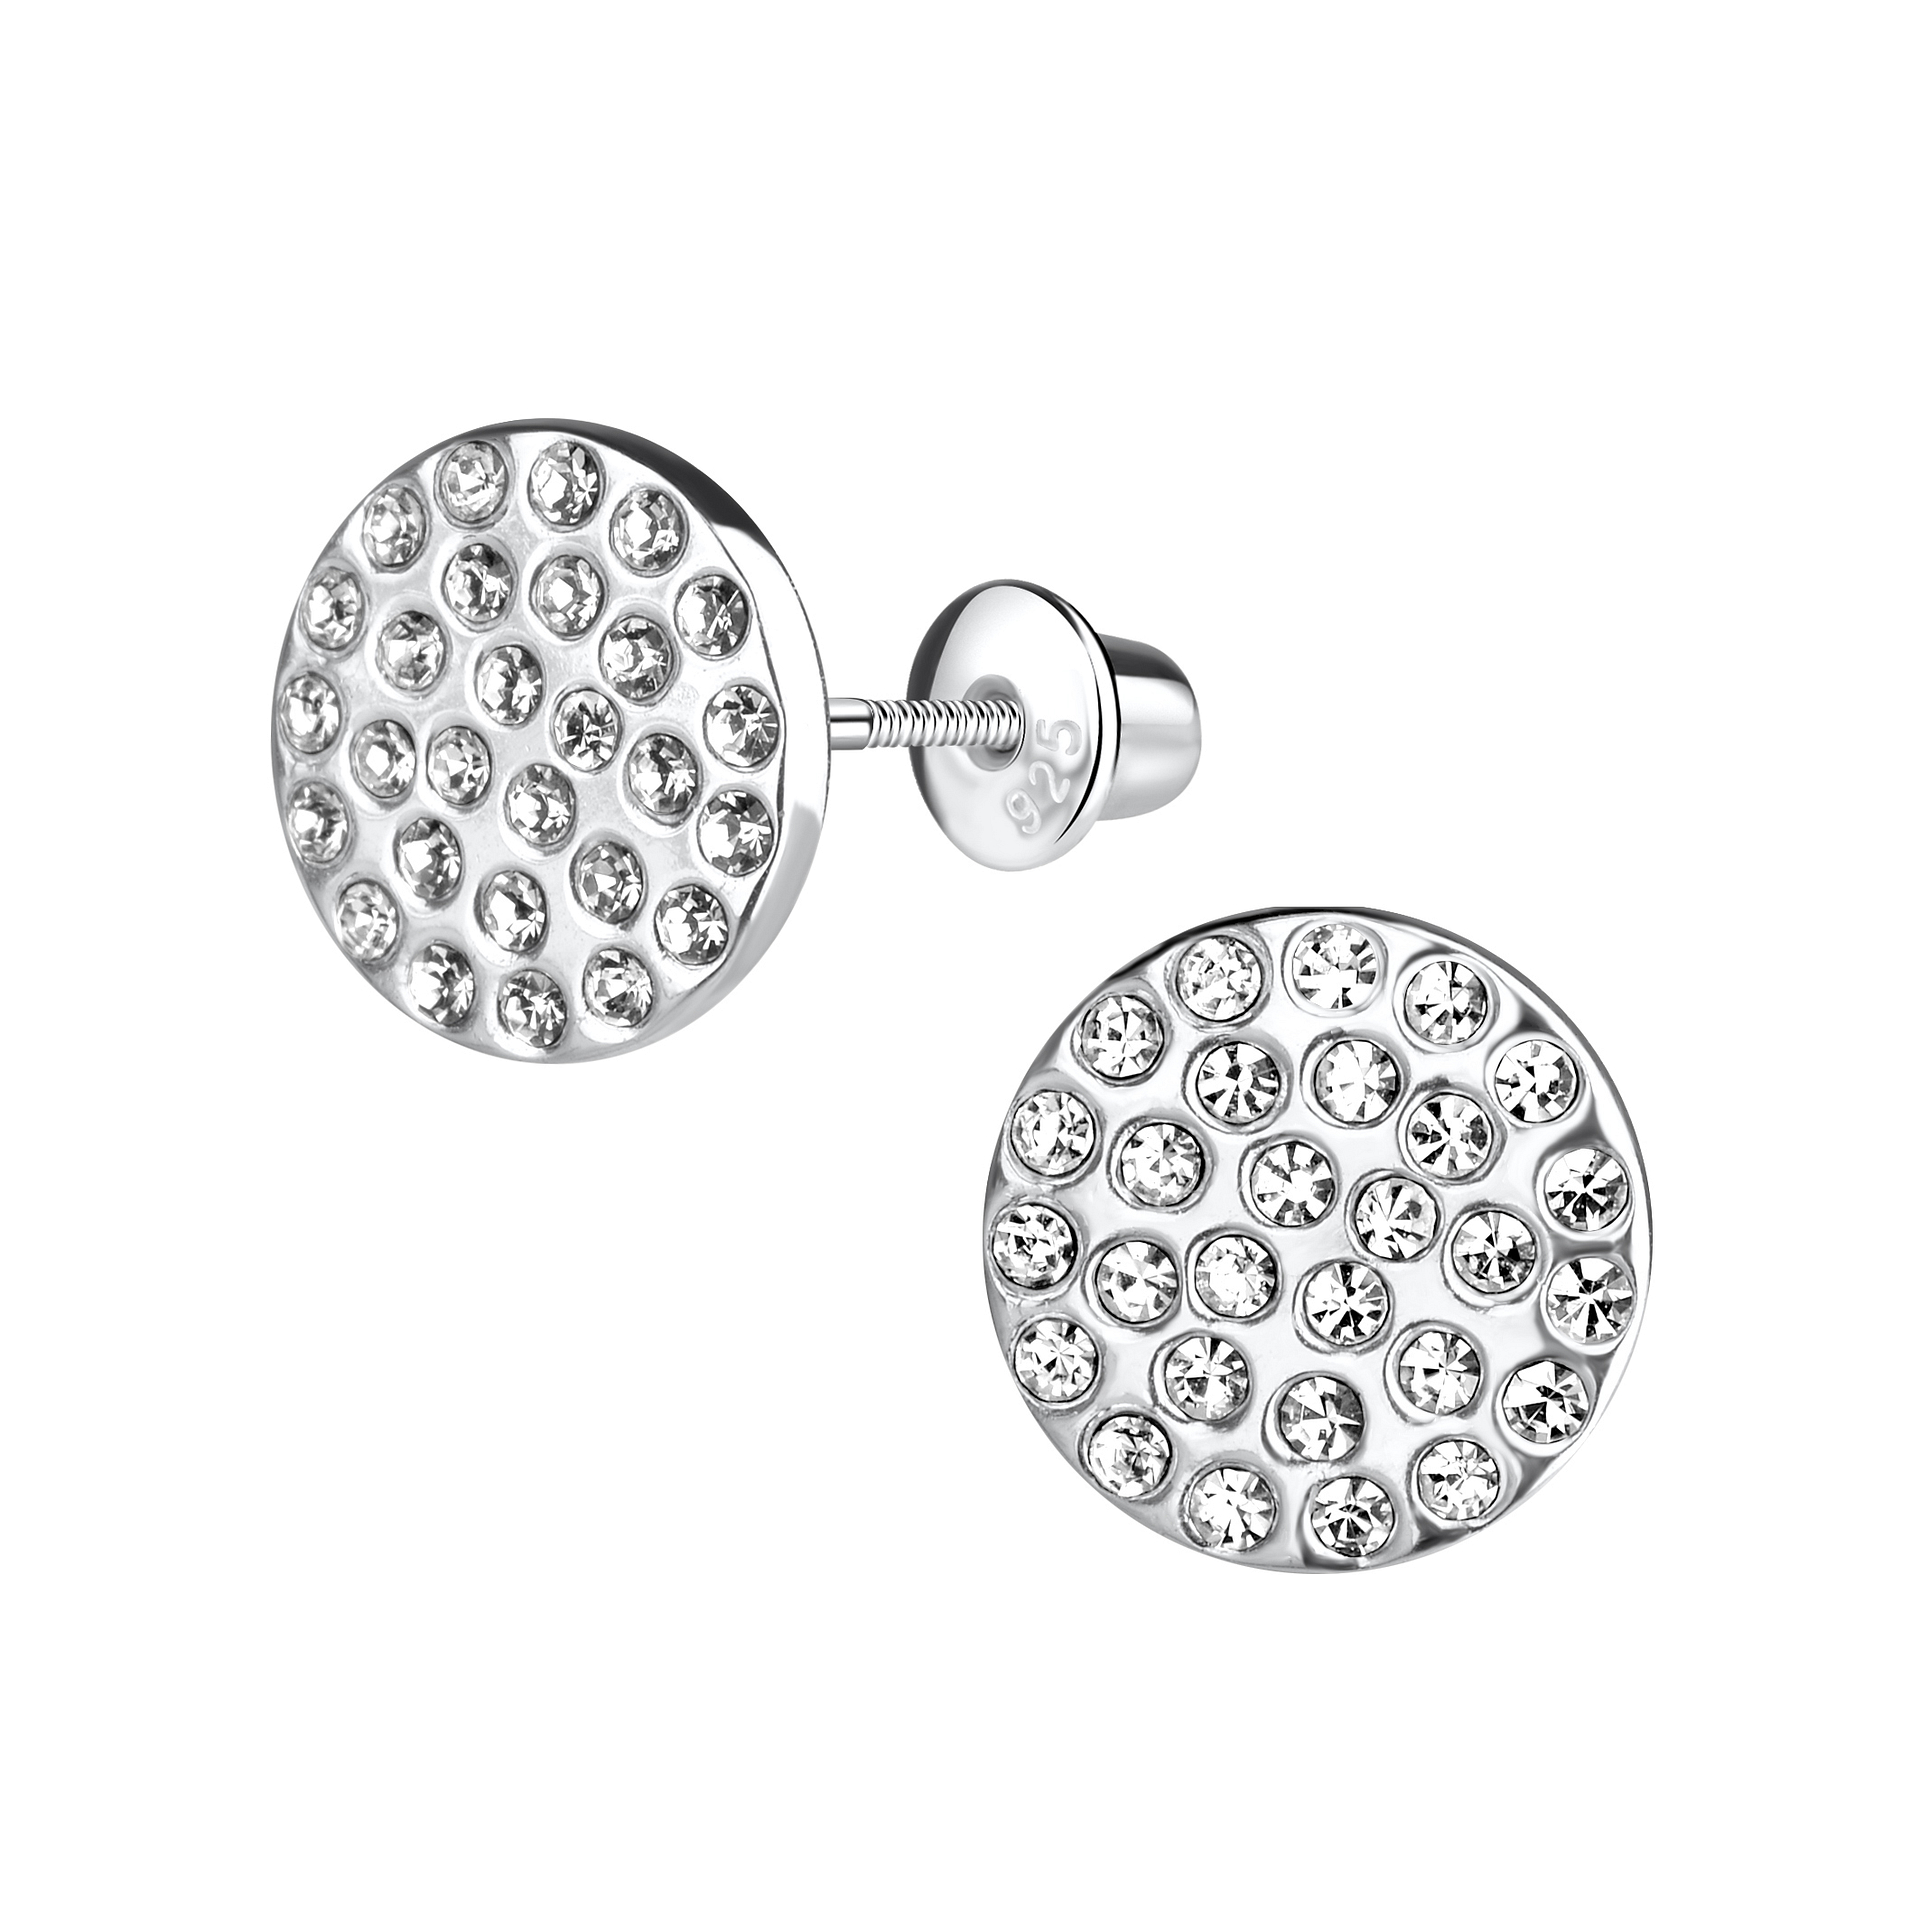 Details about   Toddler Silver Screw back STAR earrings 